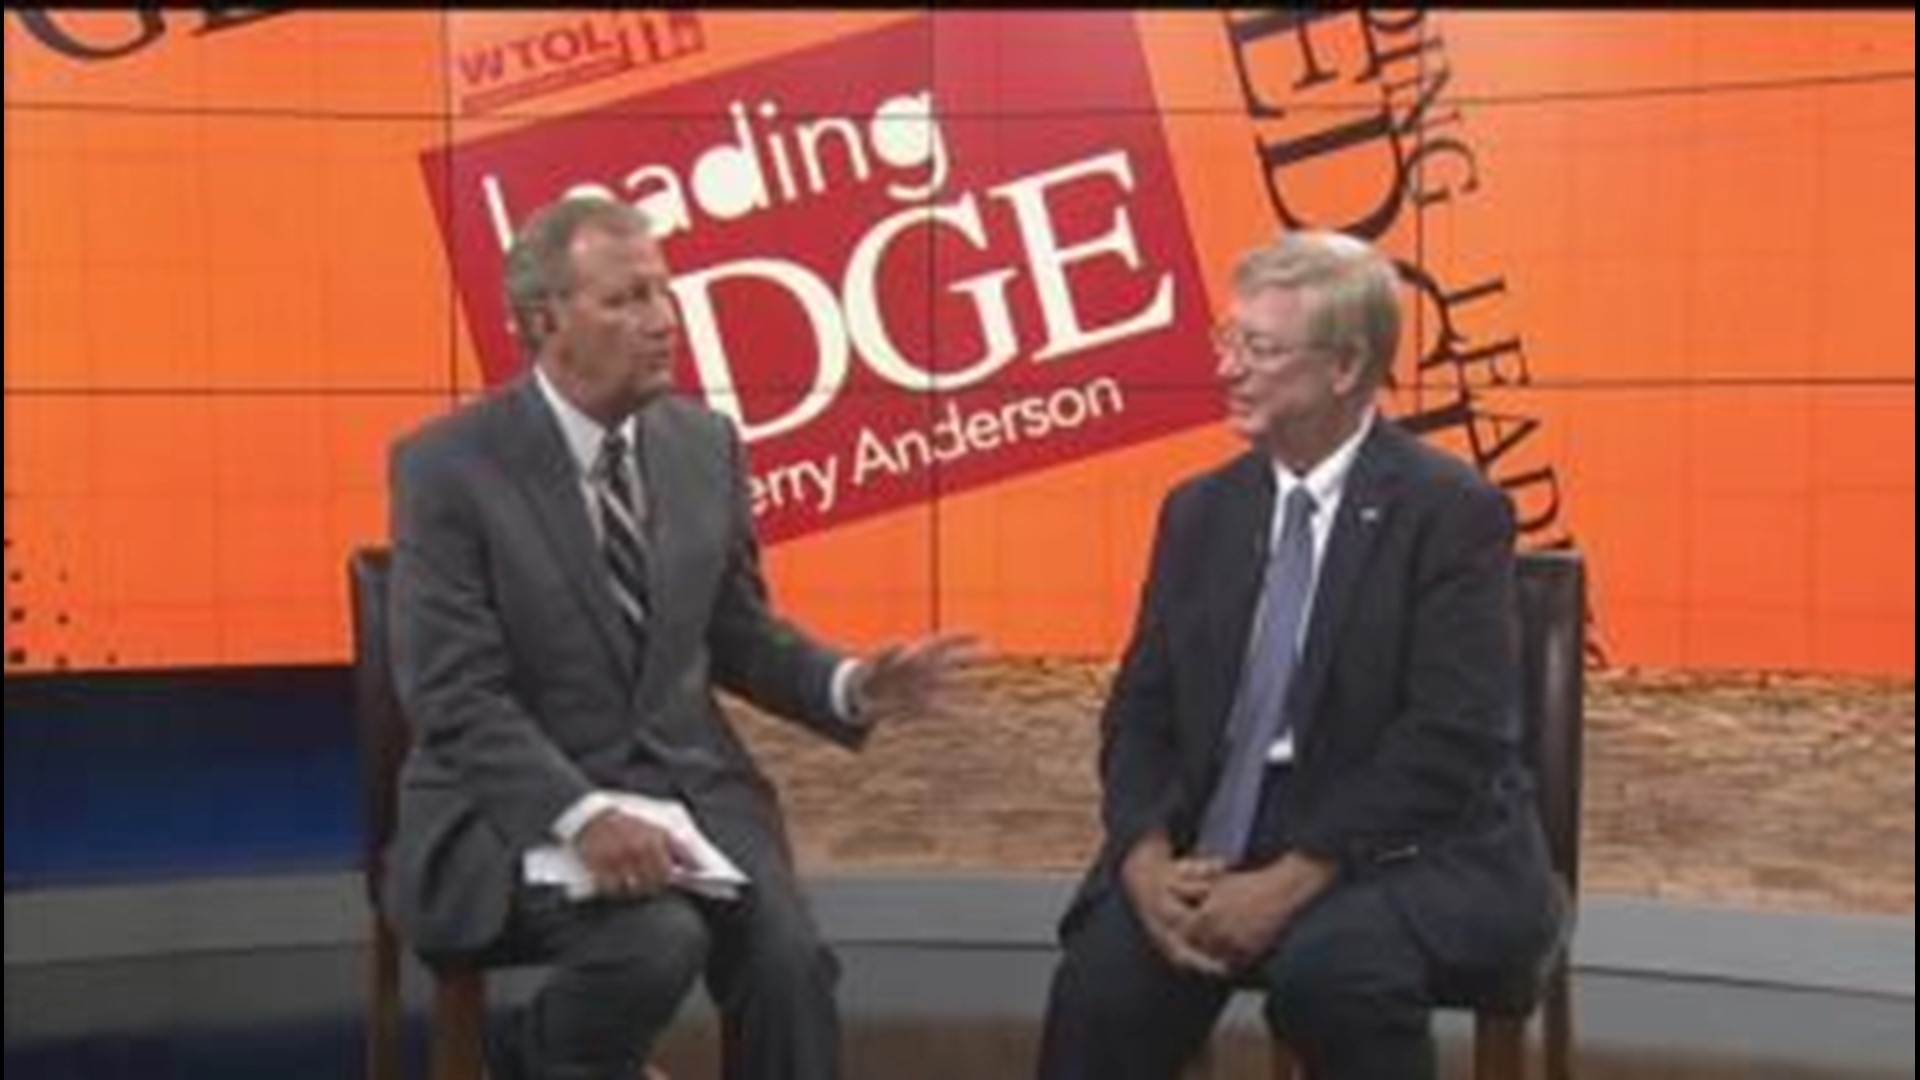 Leading Edge with Jerry Anderson - July 31, 2016